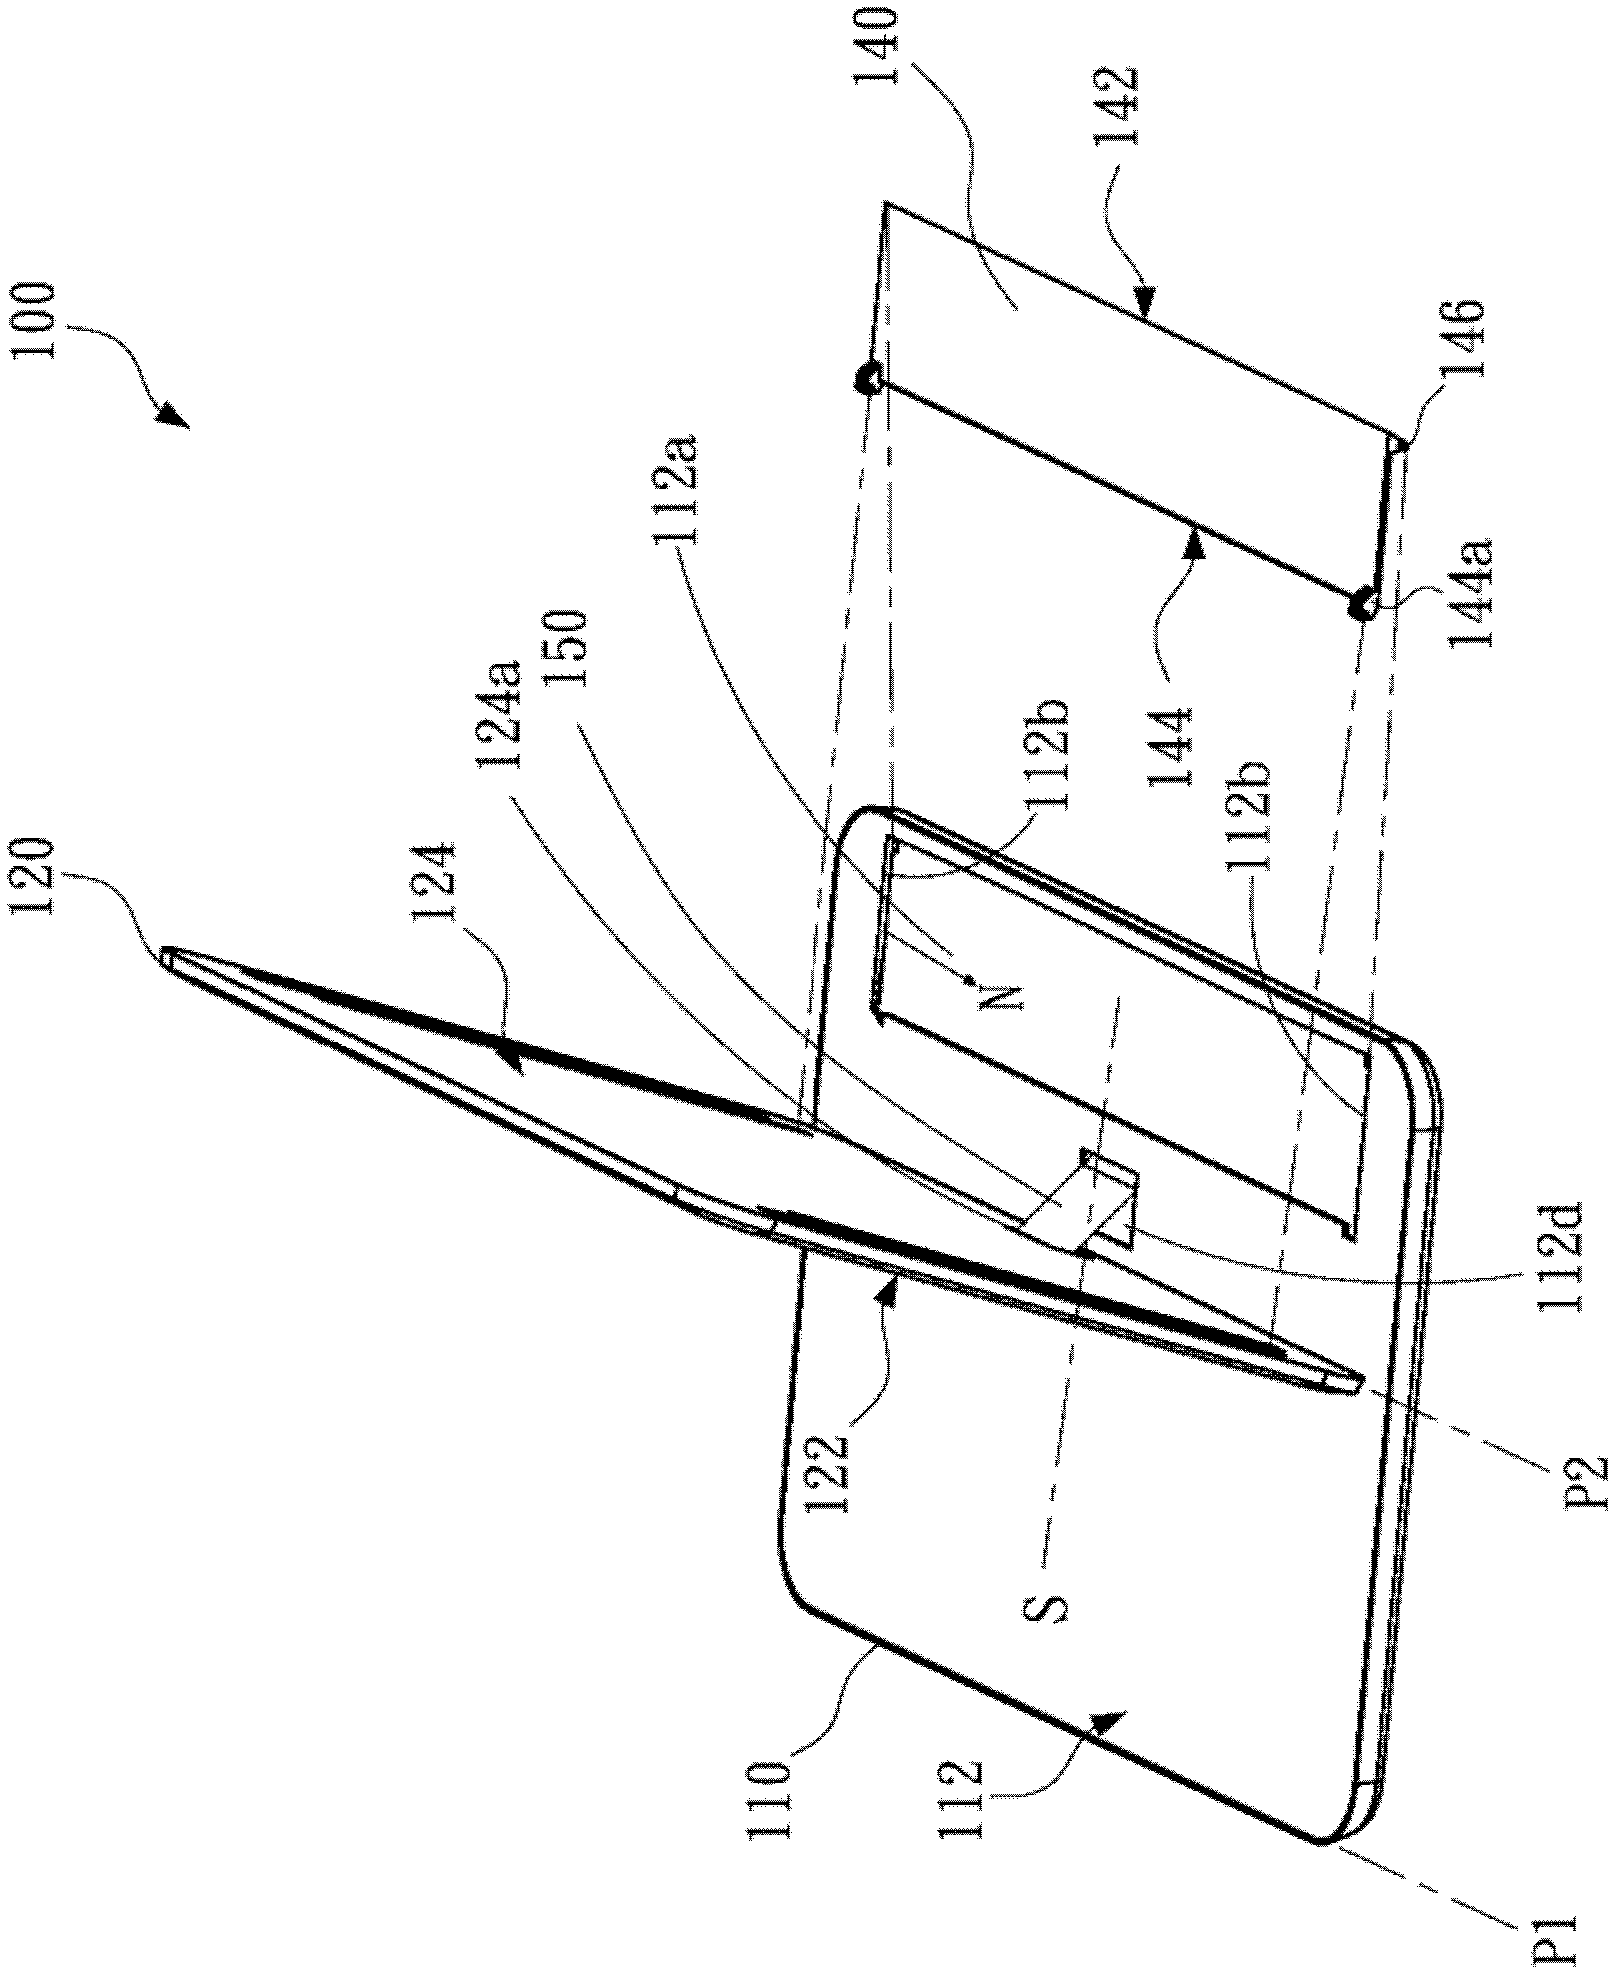 Clamshell type electronic device